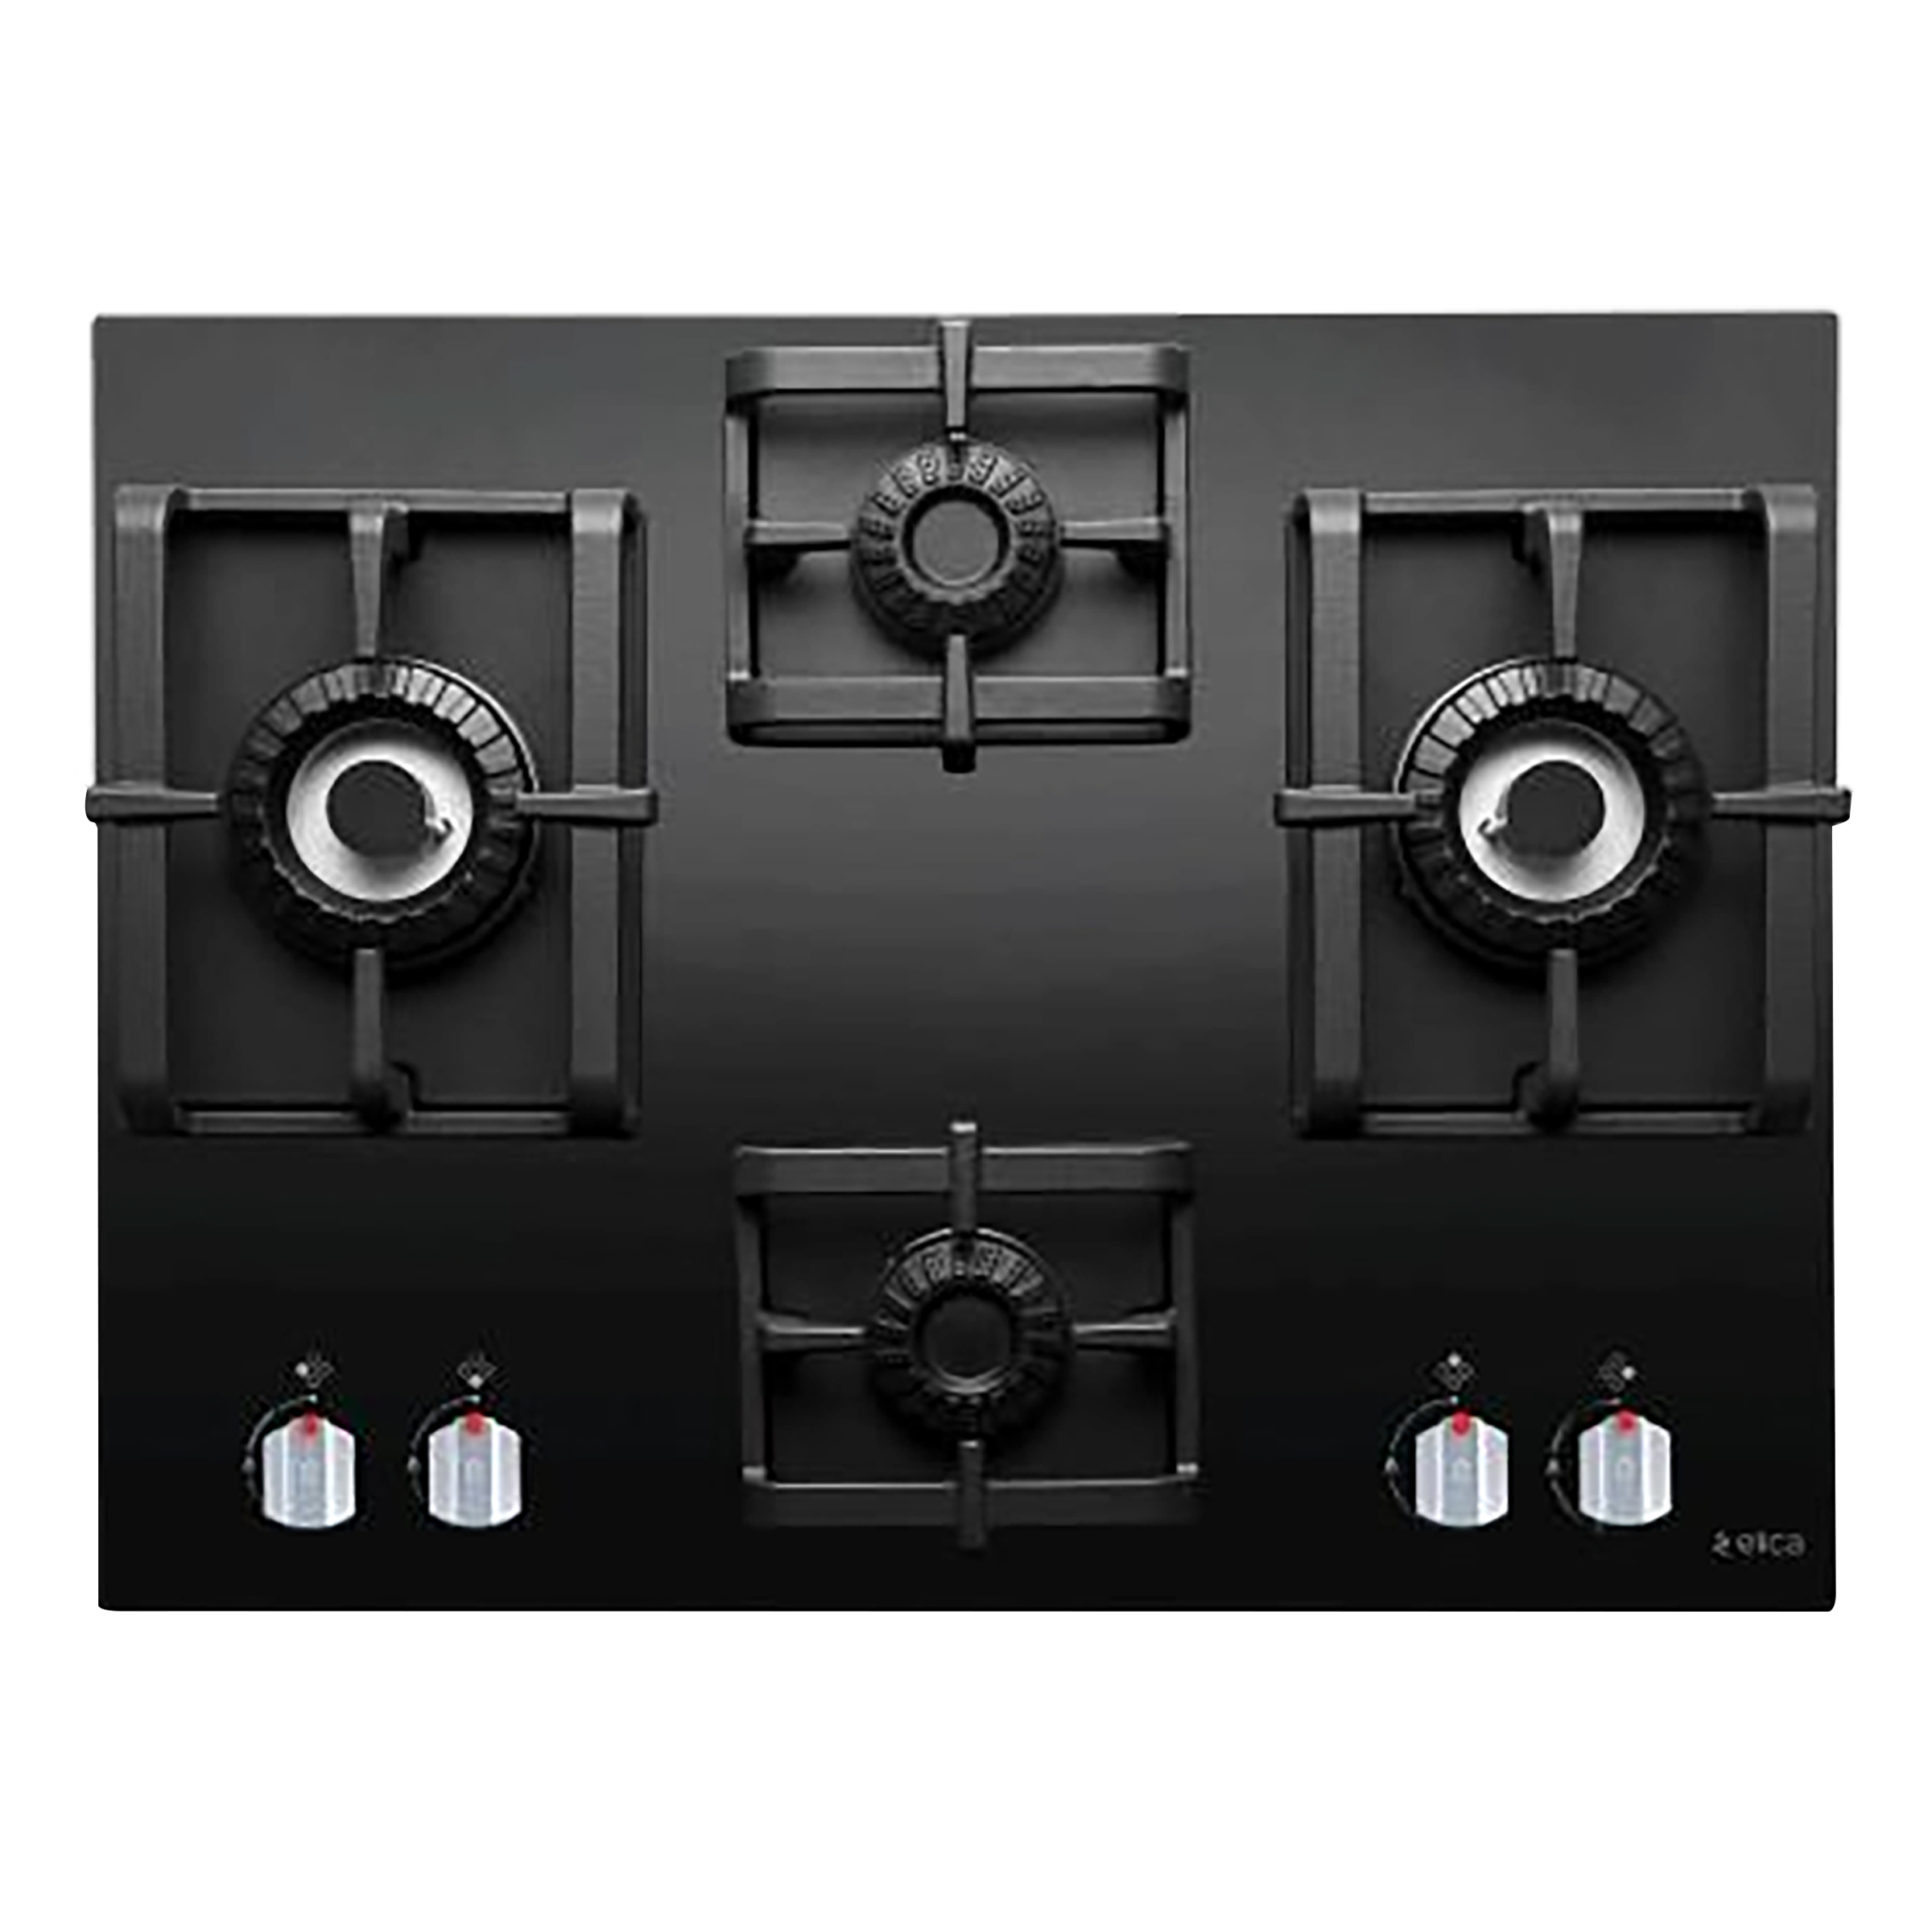 Elica Pro MFC 5 Burner Glass Built-in Gas Hob (Electric Auto Ignition, 2684, Black)_1